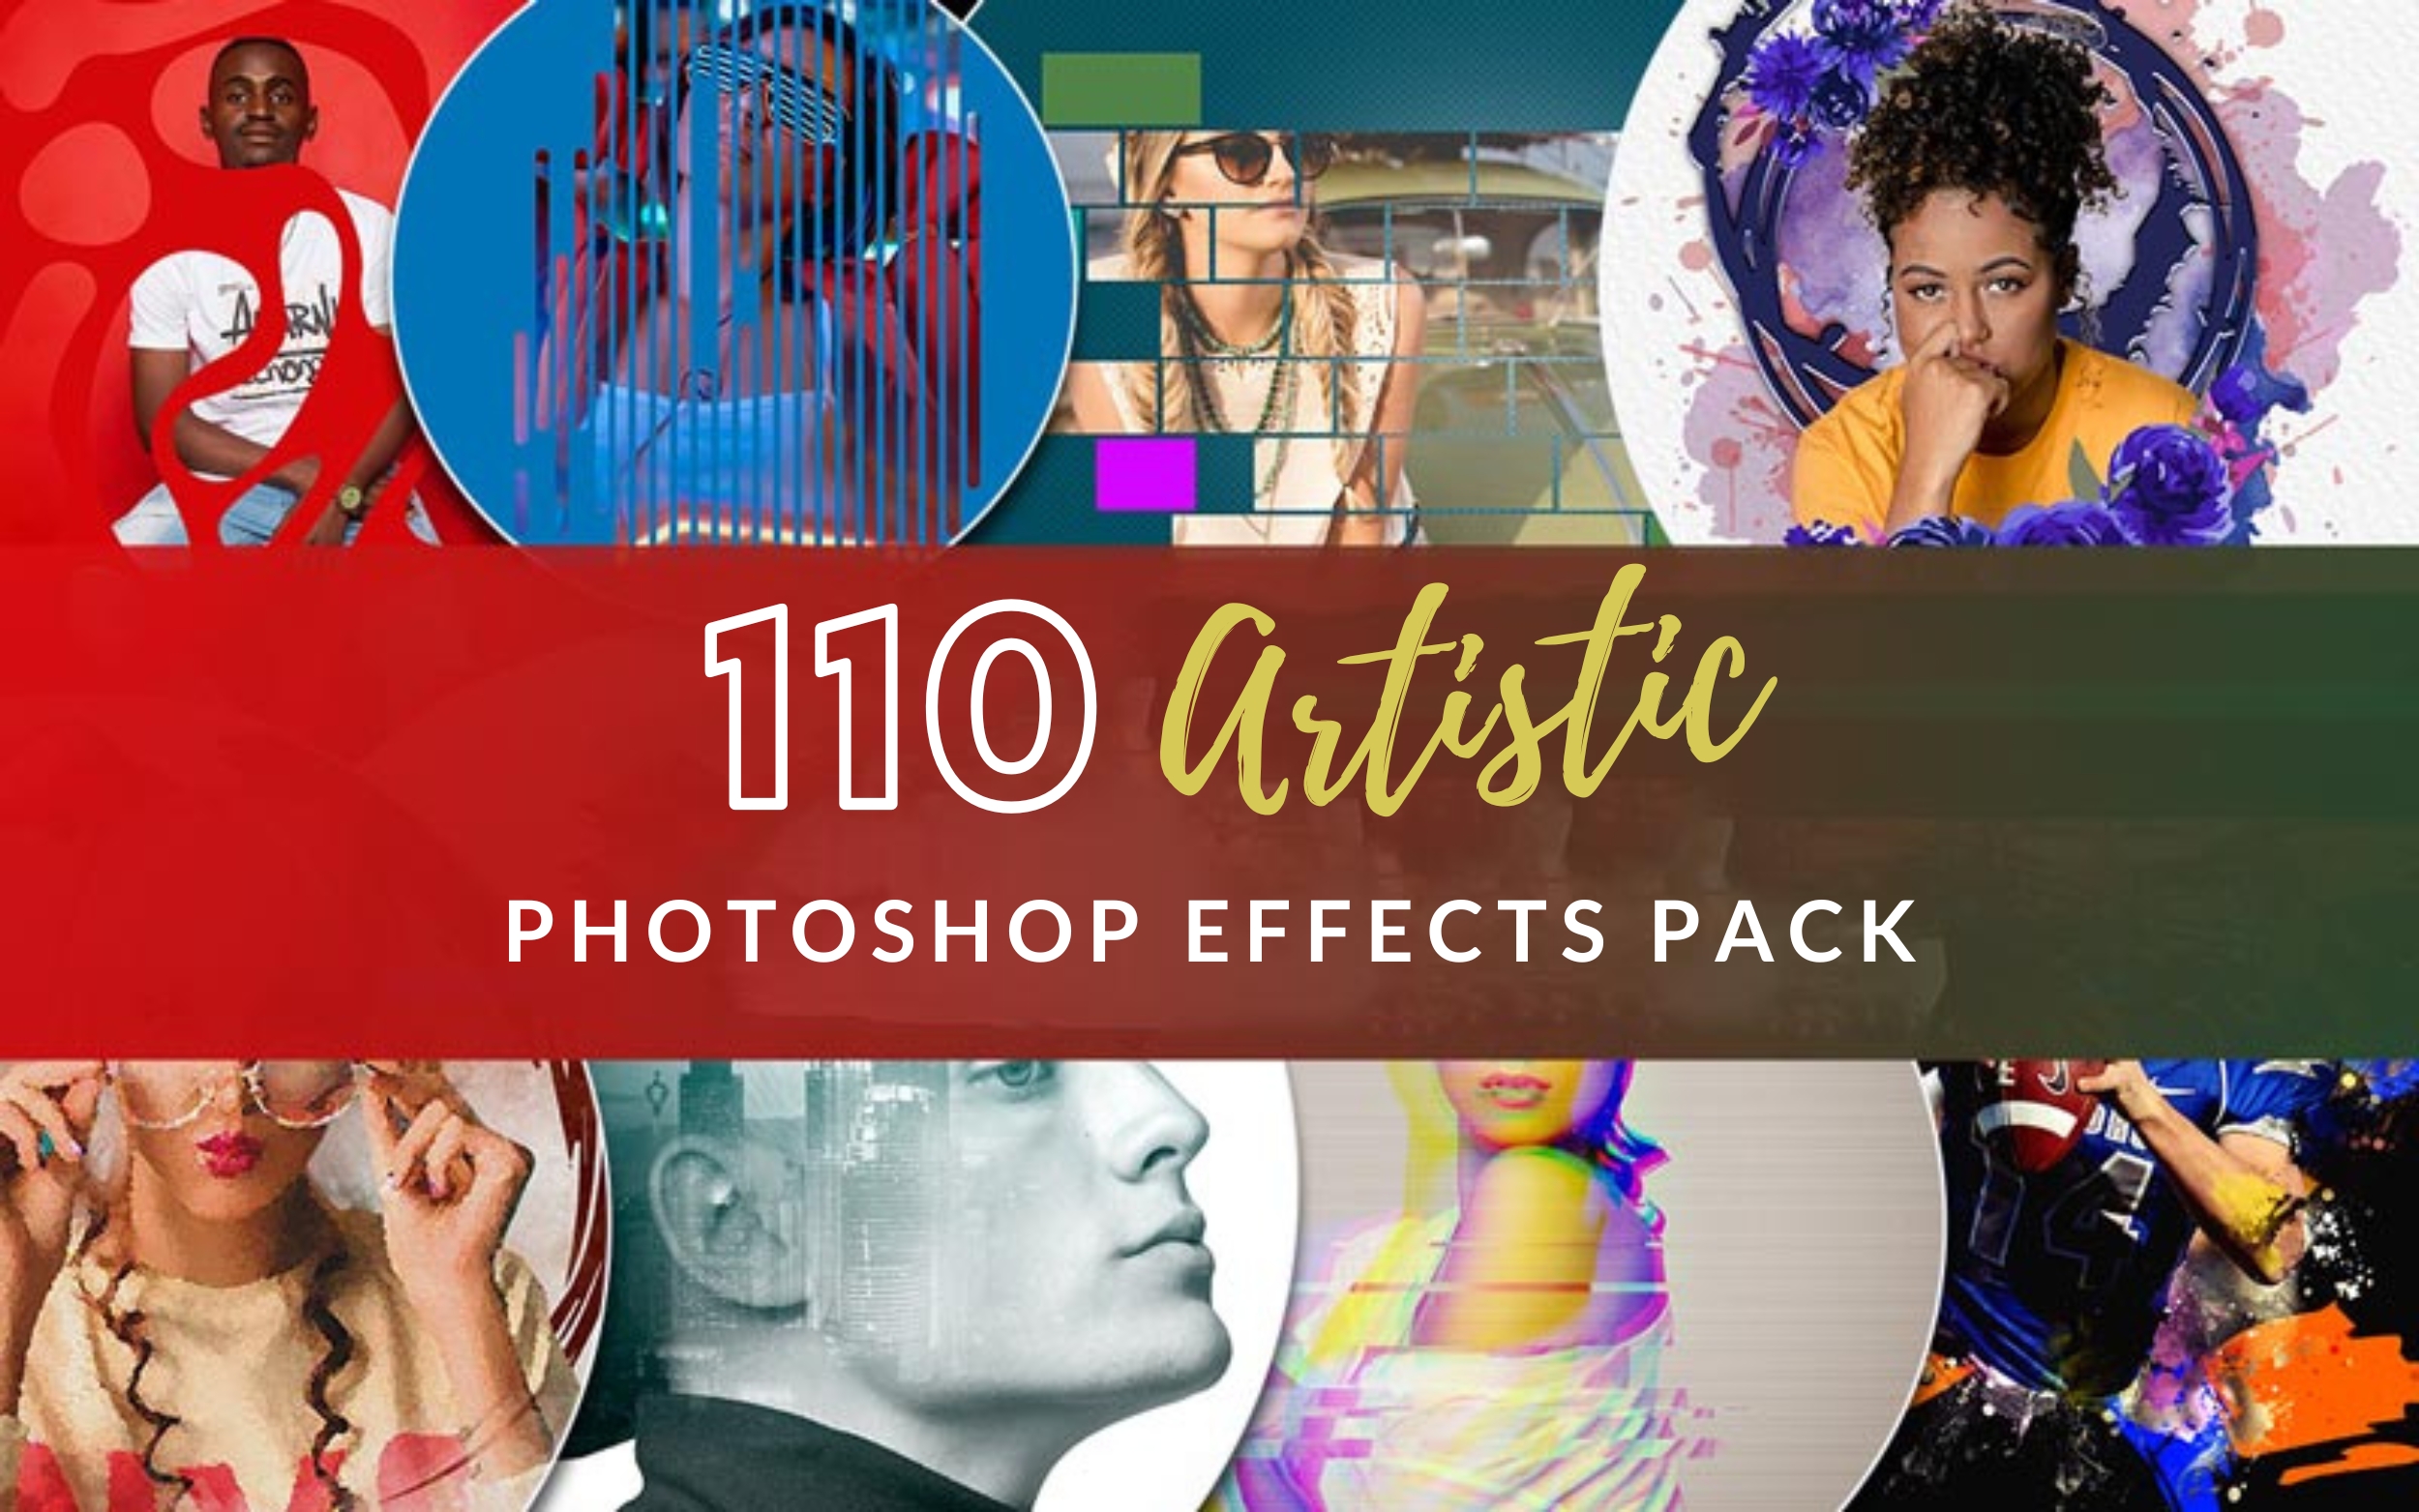 Photoshop-Effect-Feature-Images